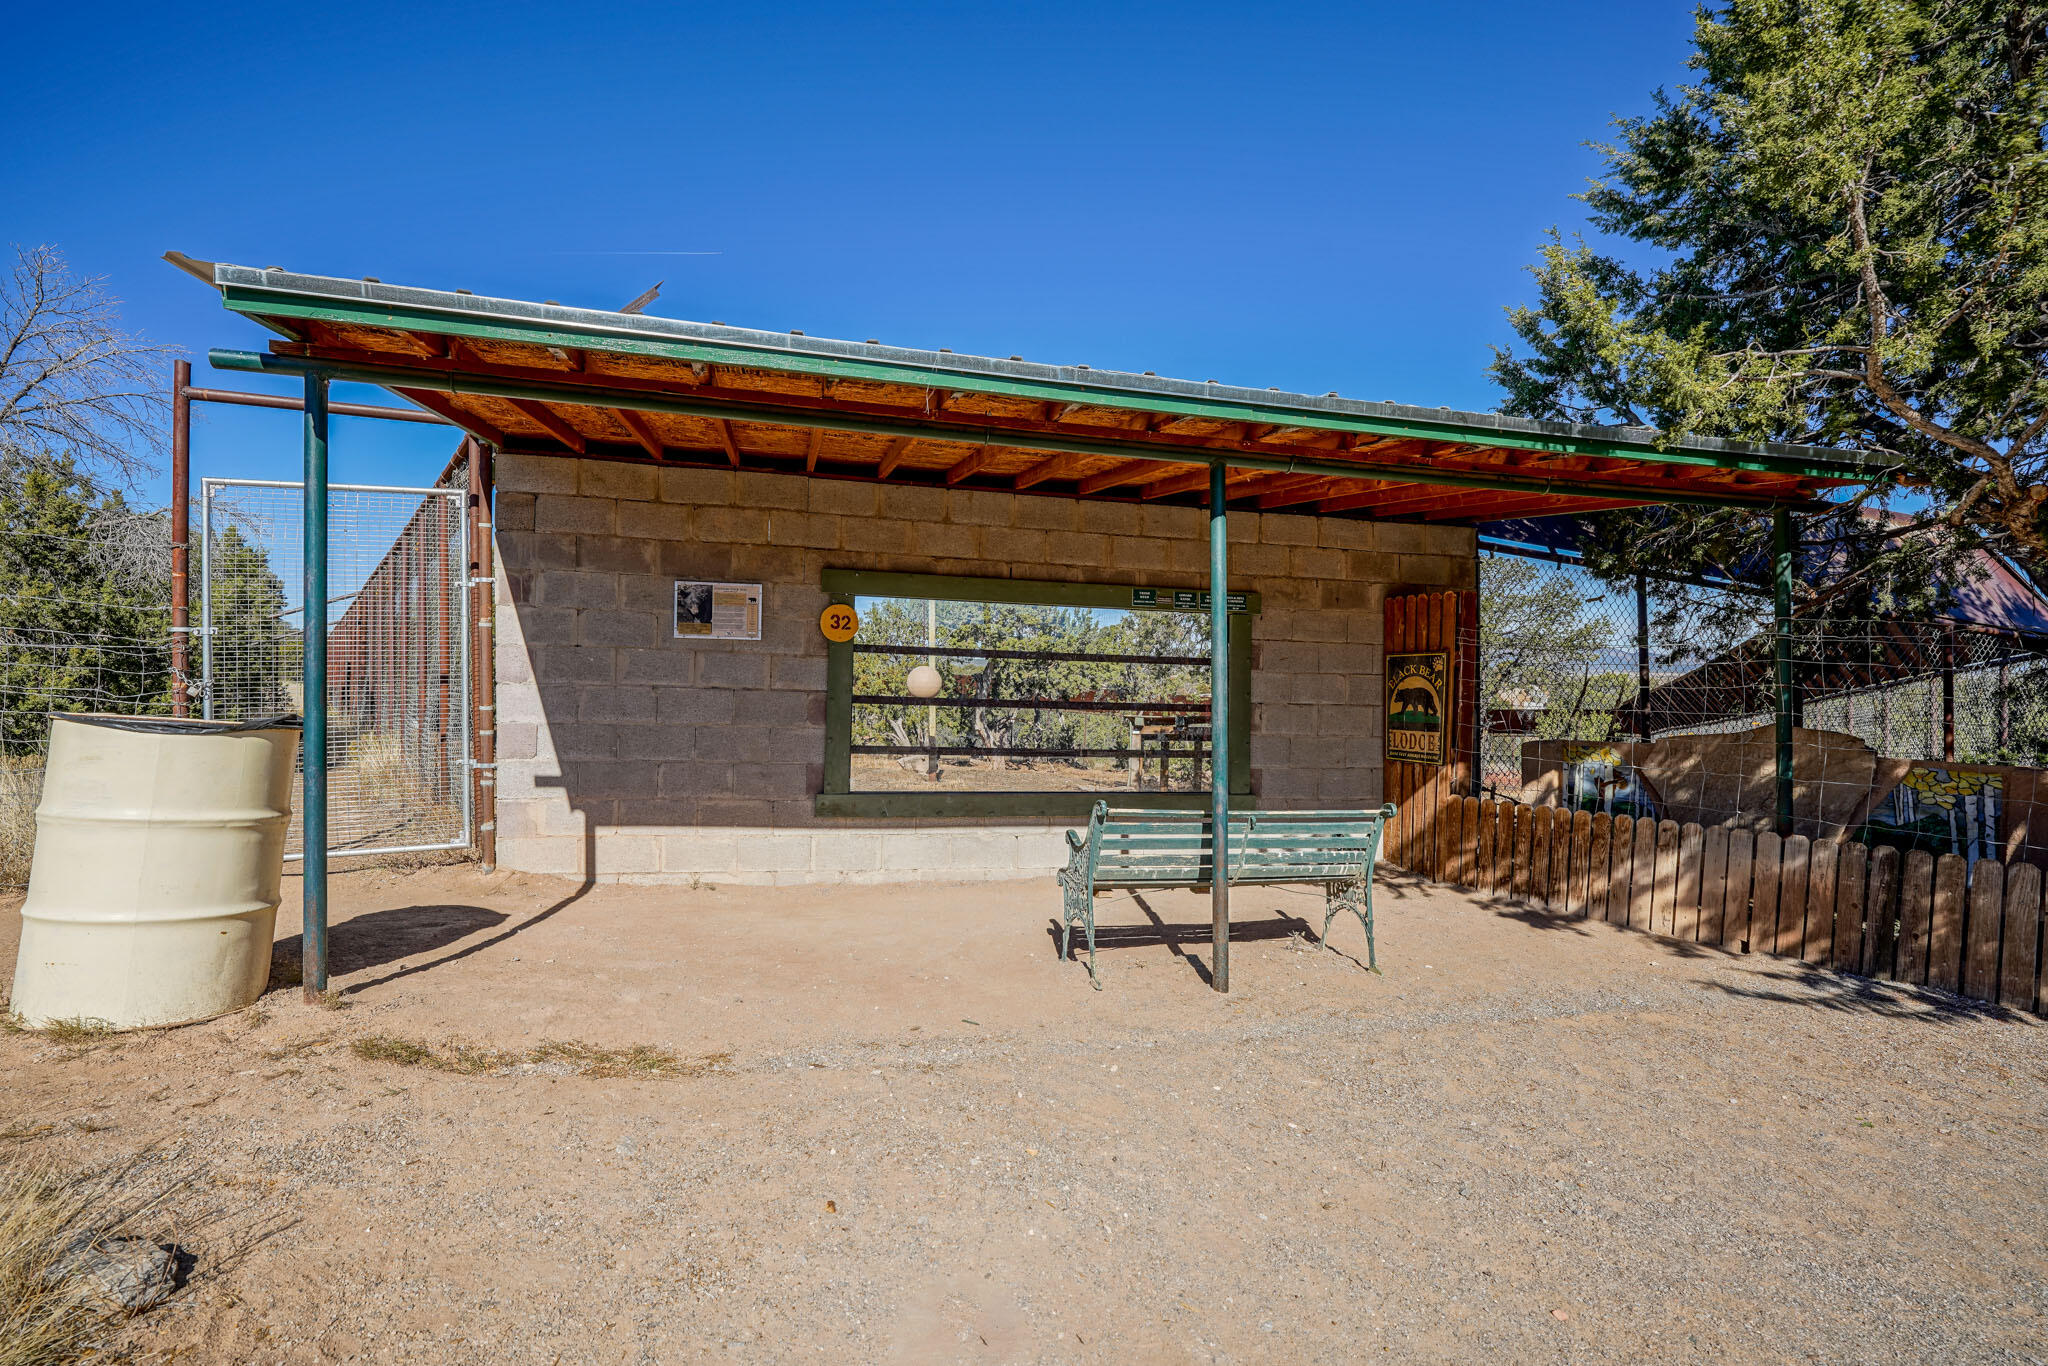 87 N Frontage Road, Edgewood, New Mexico 87015, ,Land,For Sale,87 N Frontage Road,1059494